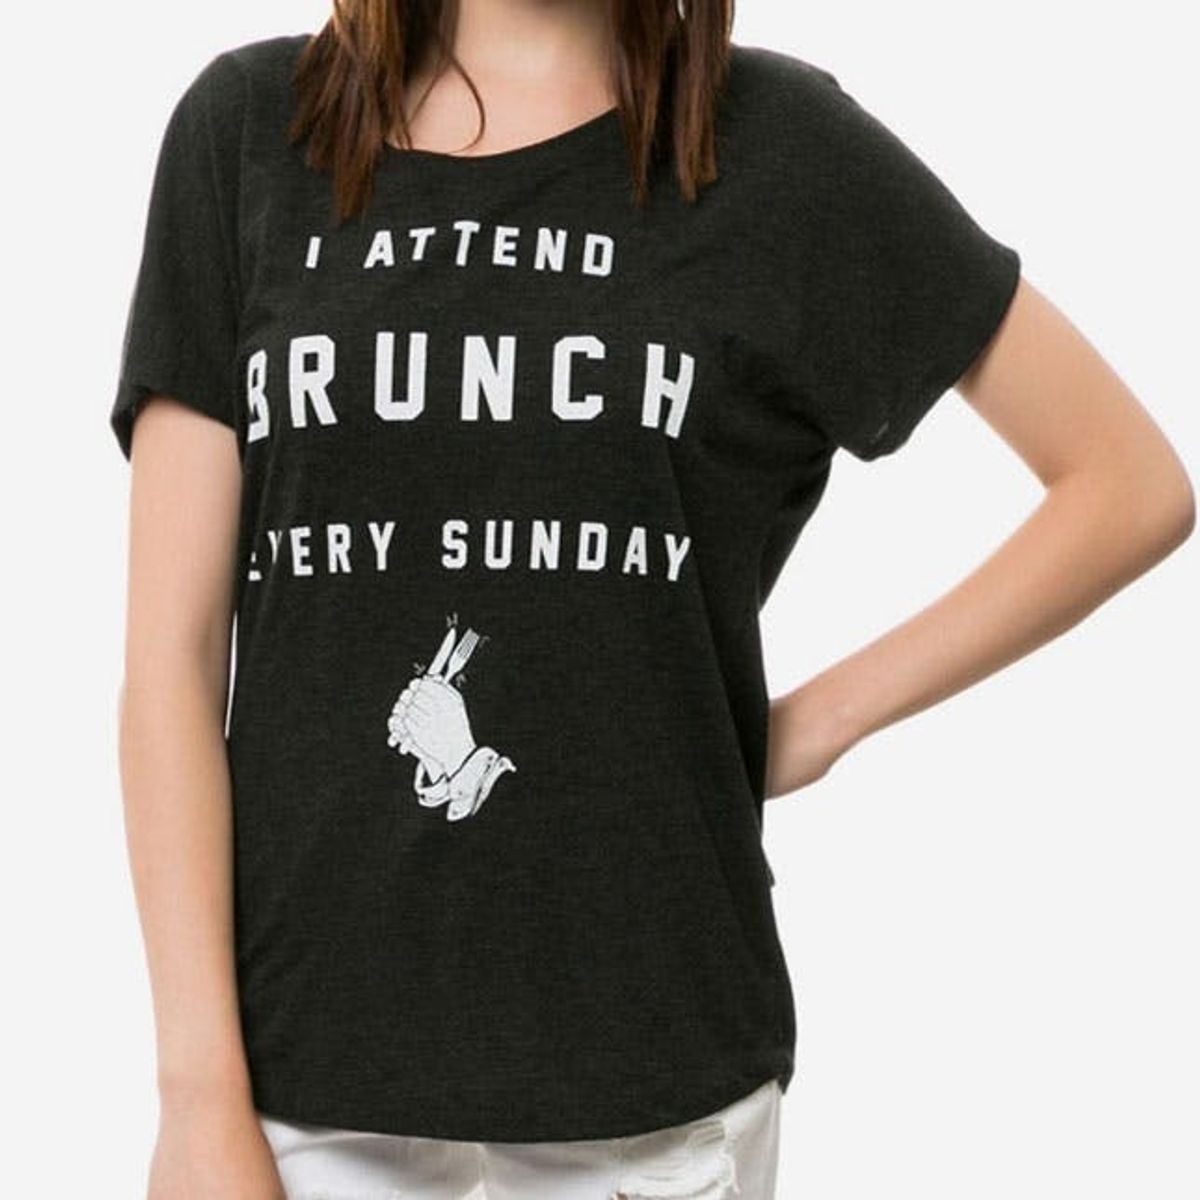 18 Gift Ideas for Every Brunch Lover on Your List